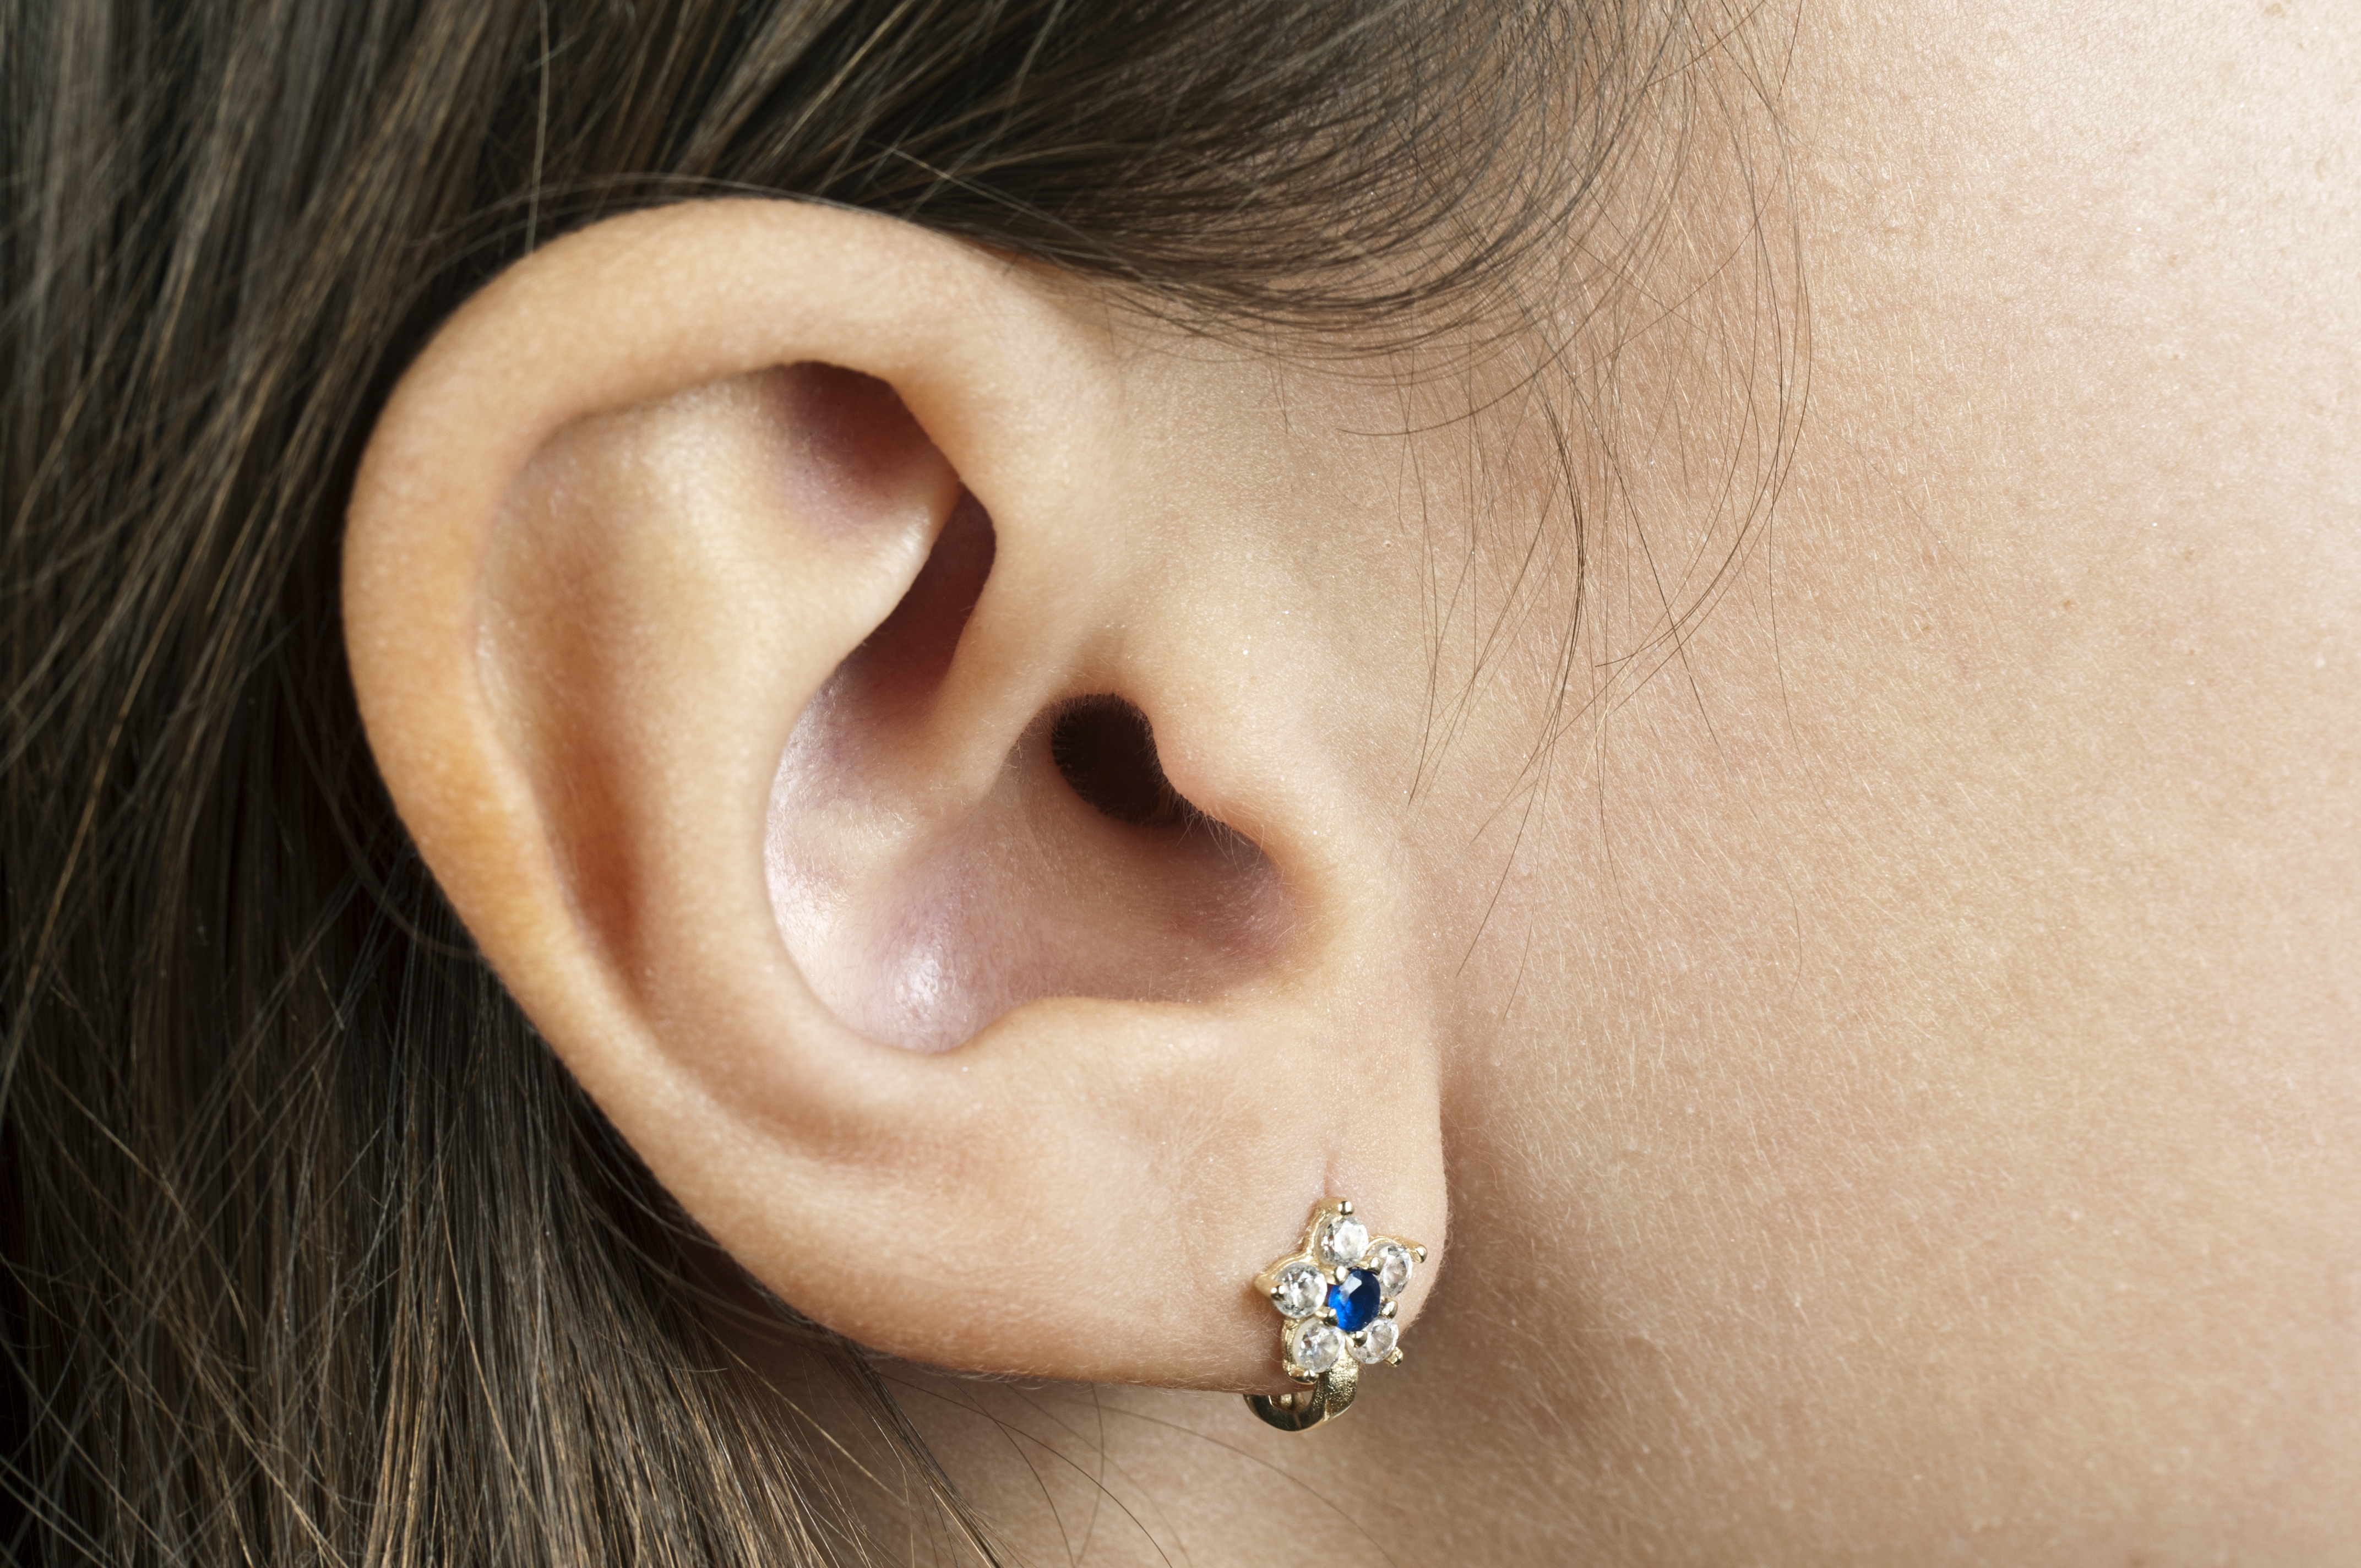 Human Ear | Source: Getty Images